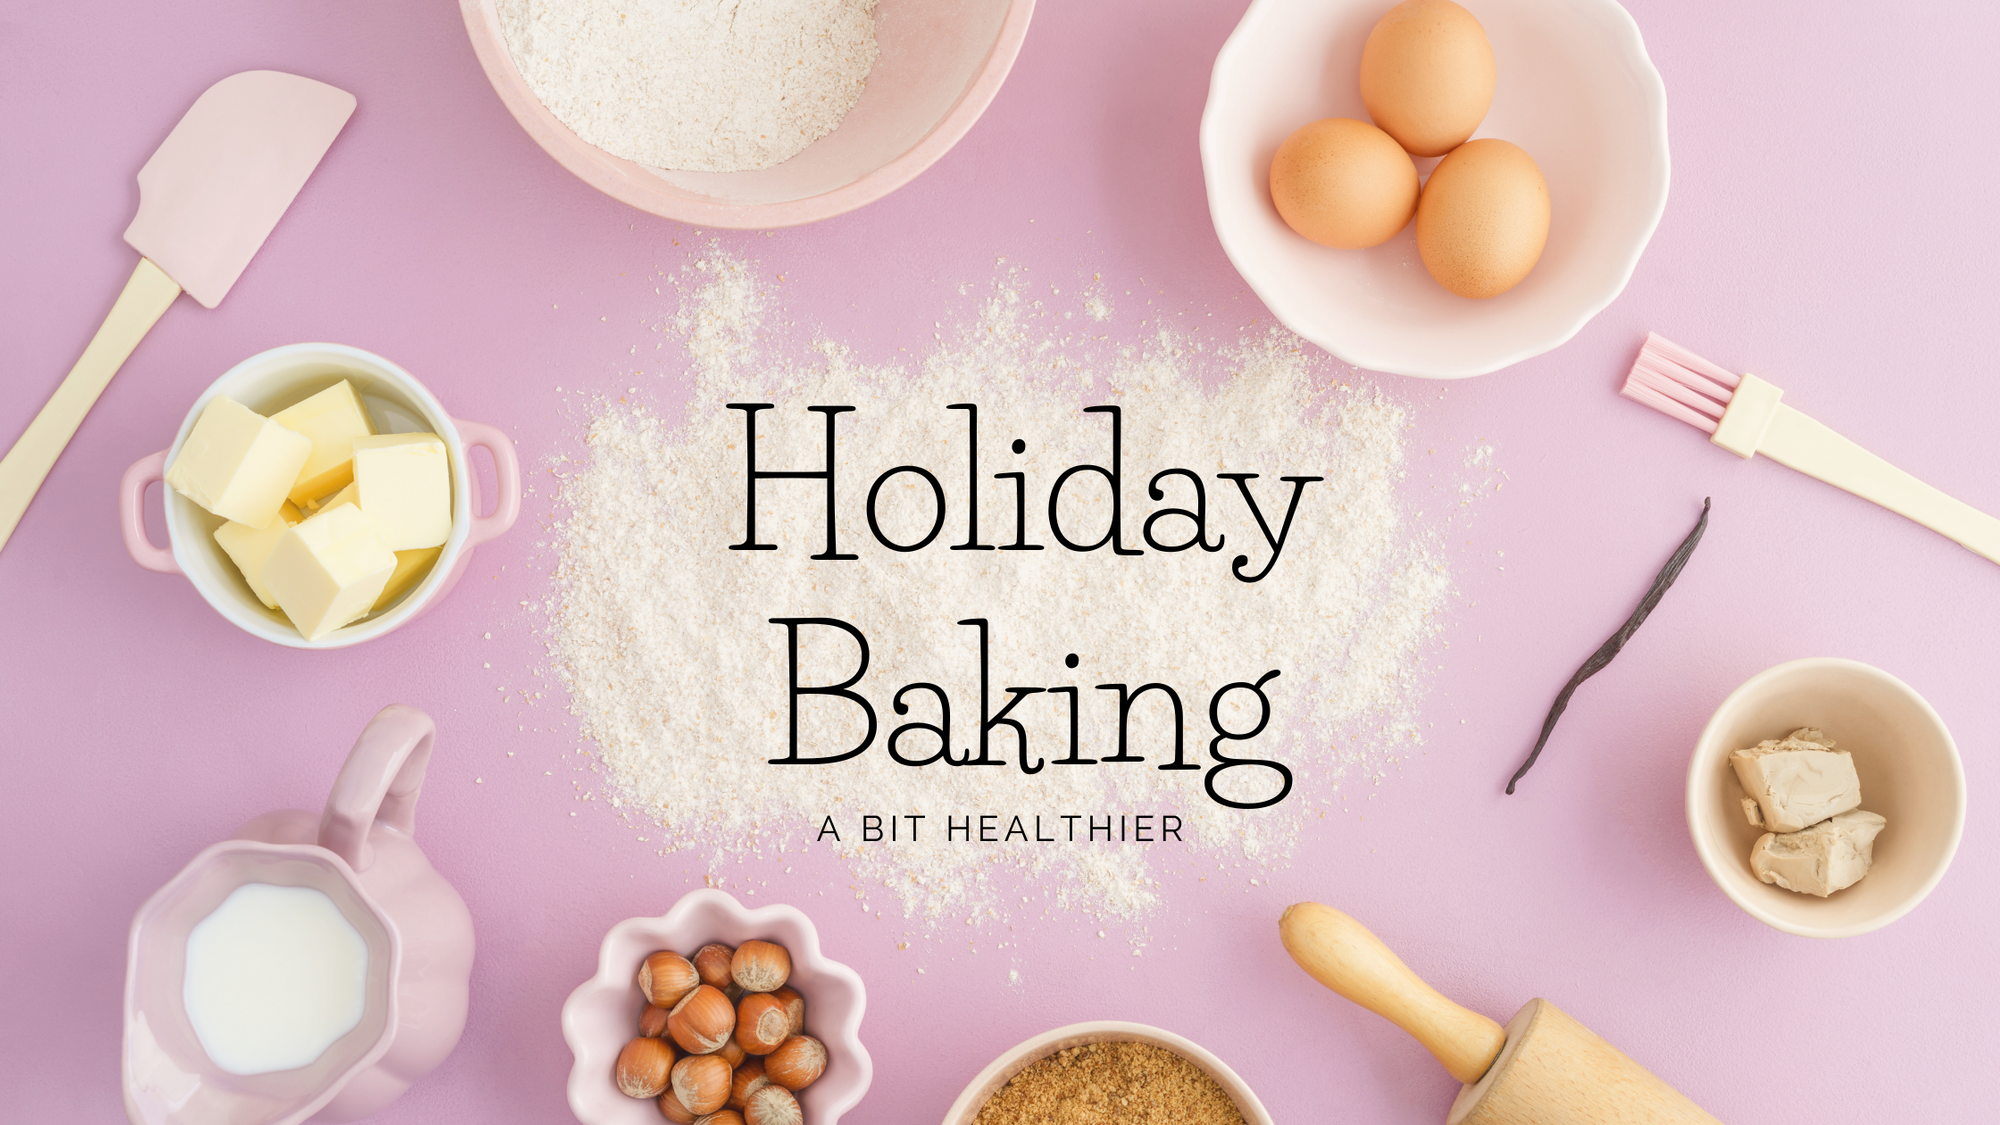 Christmas Baking without artificial dye (plant-based)